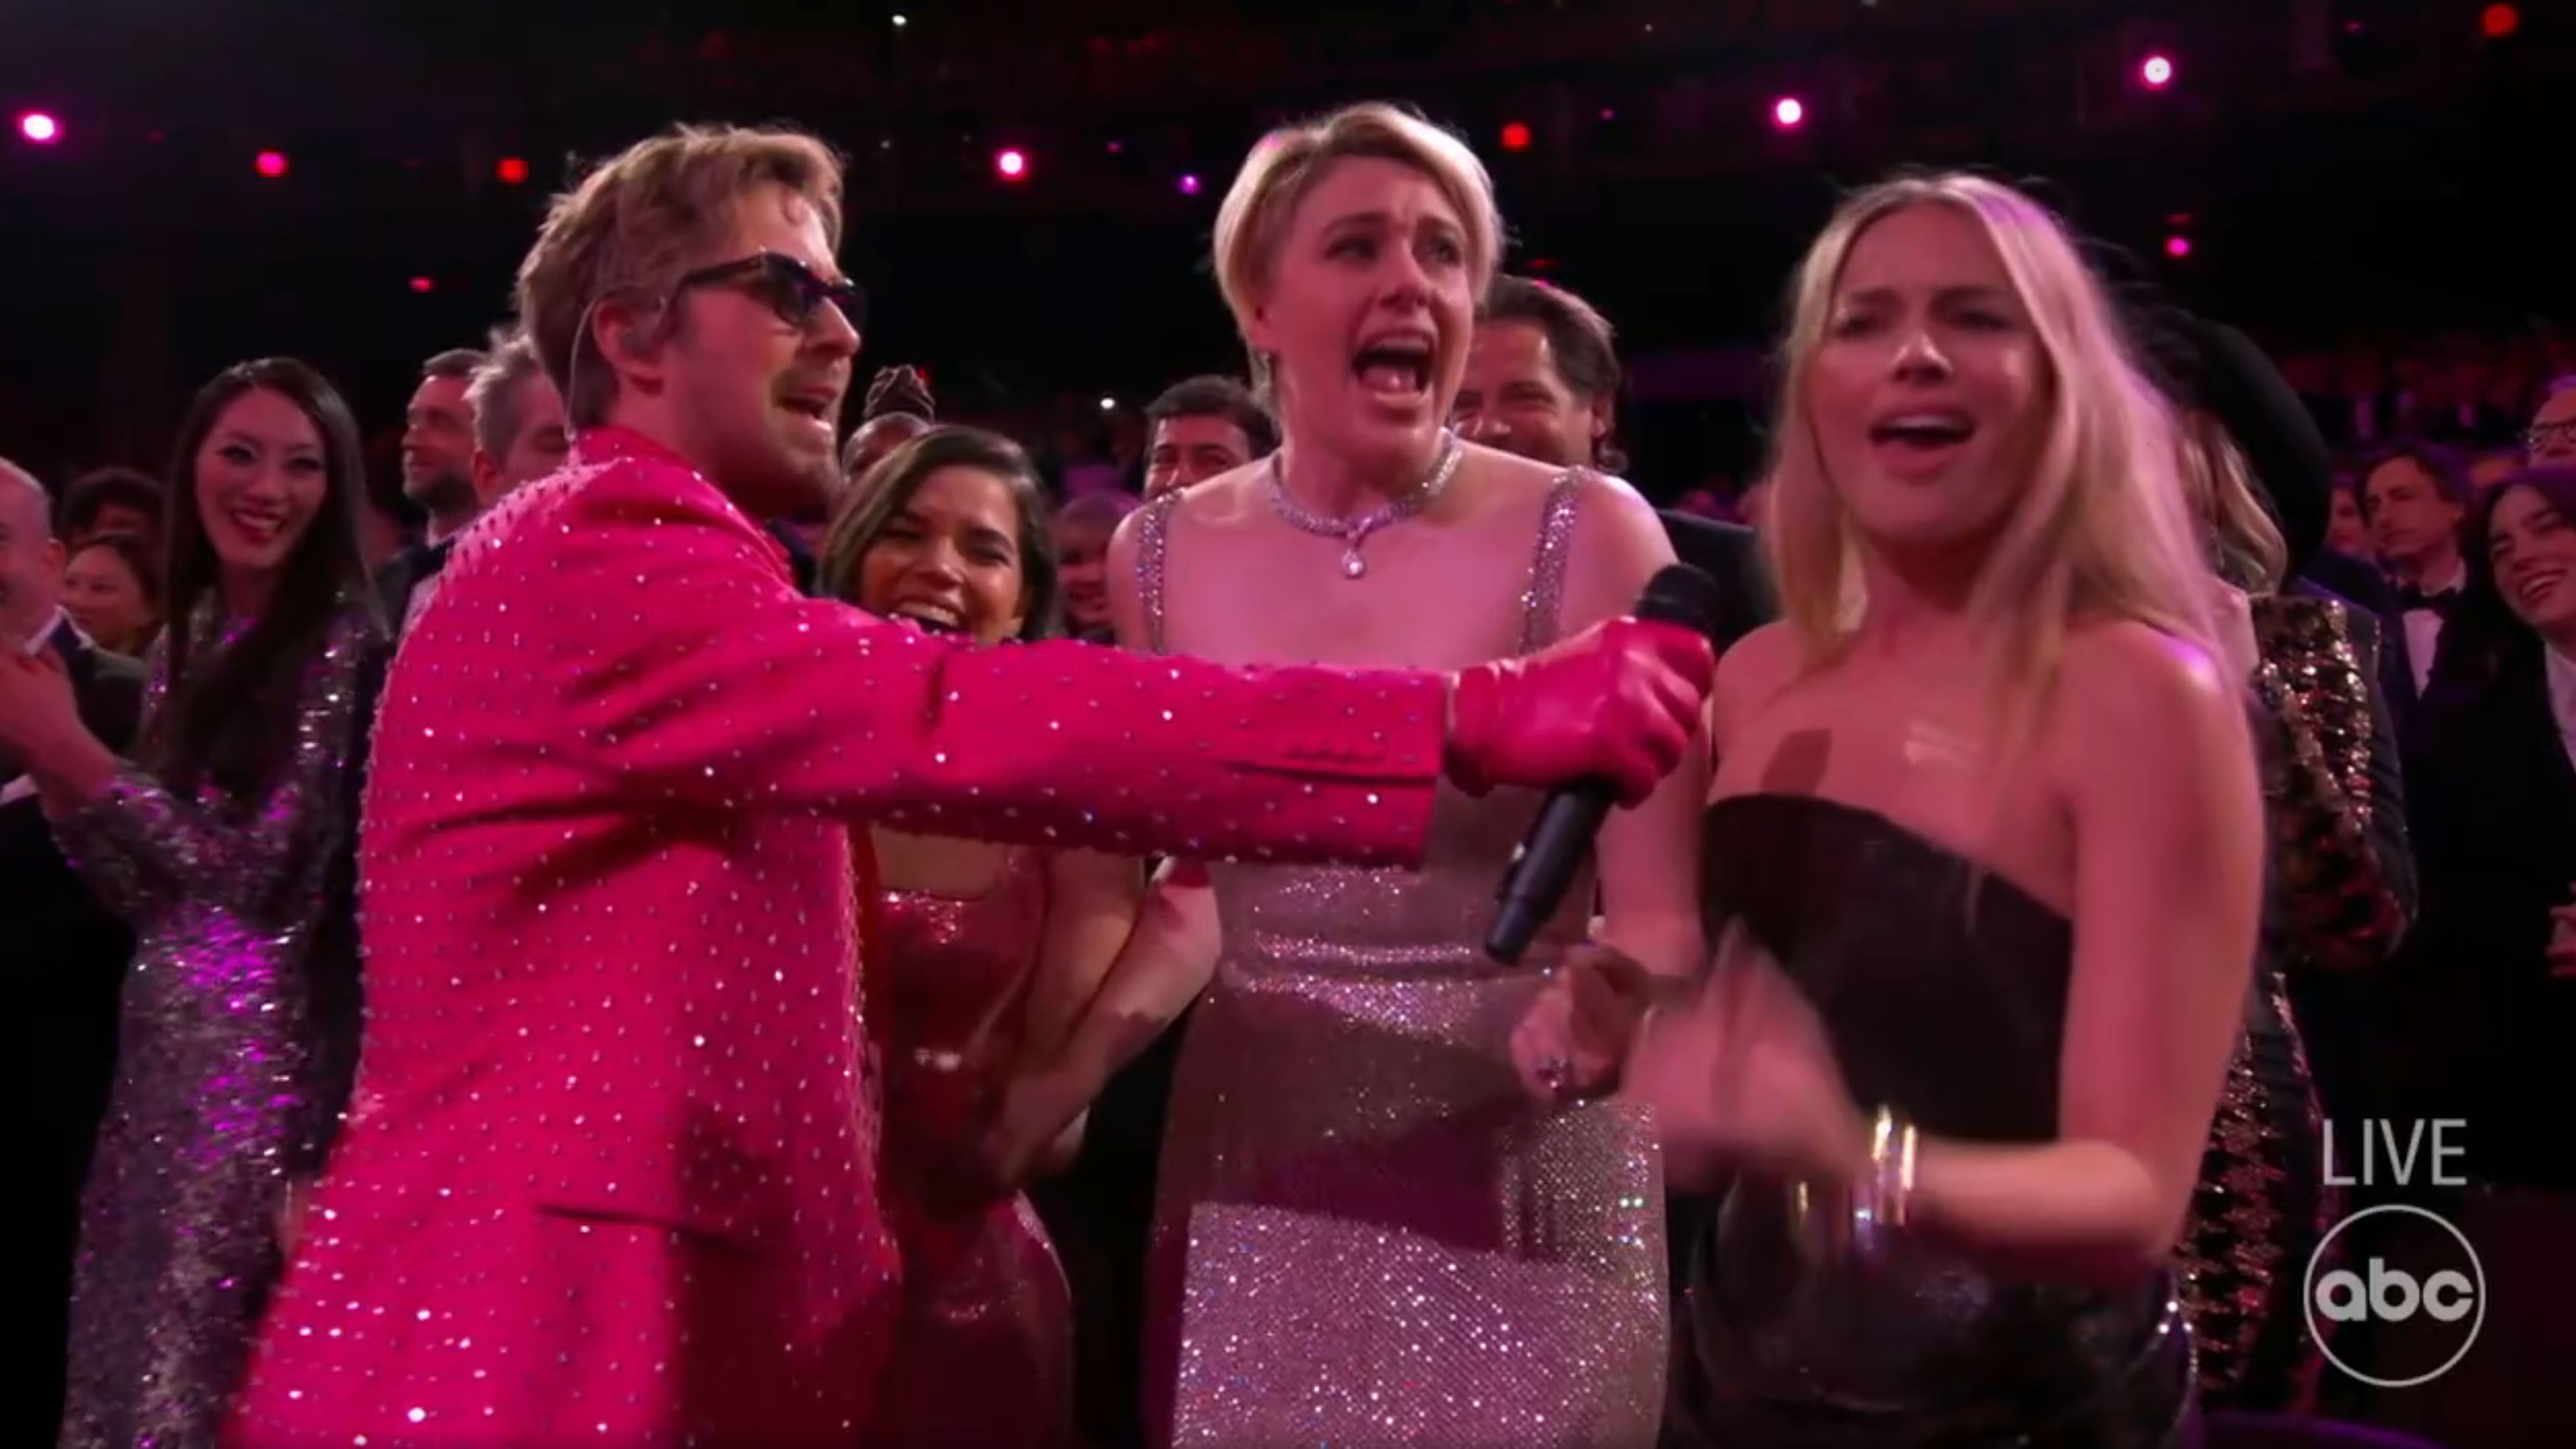 Margot Robbie and Greta Gerwig also joined in to sing